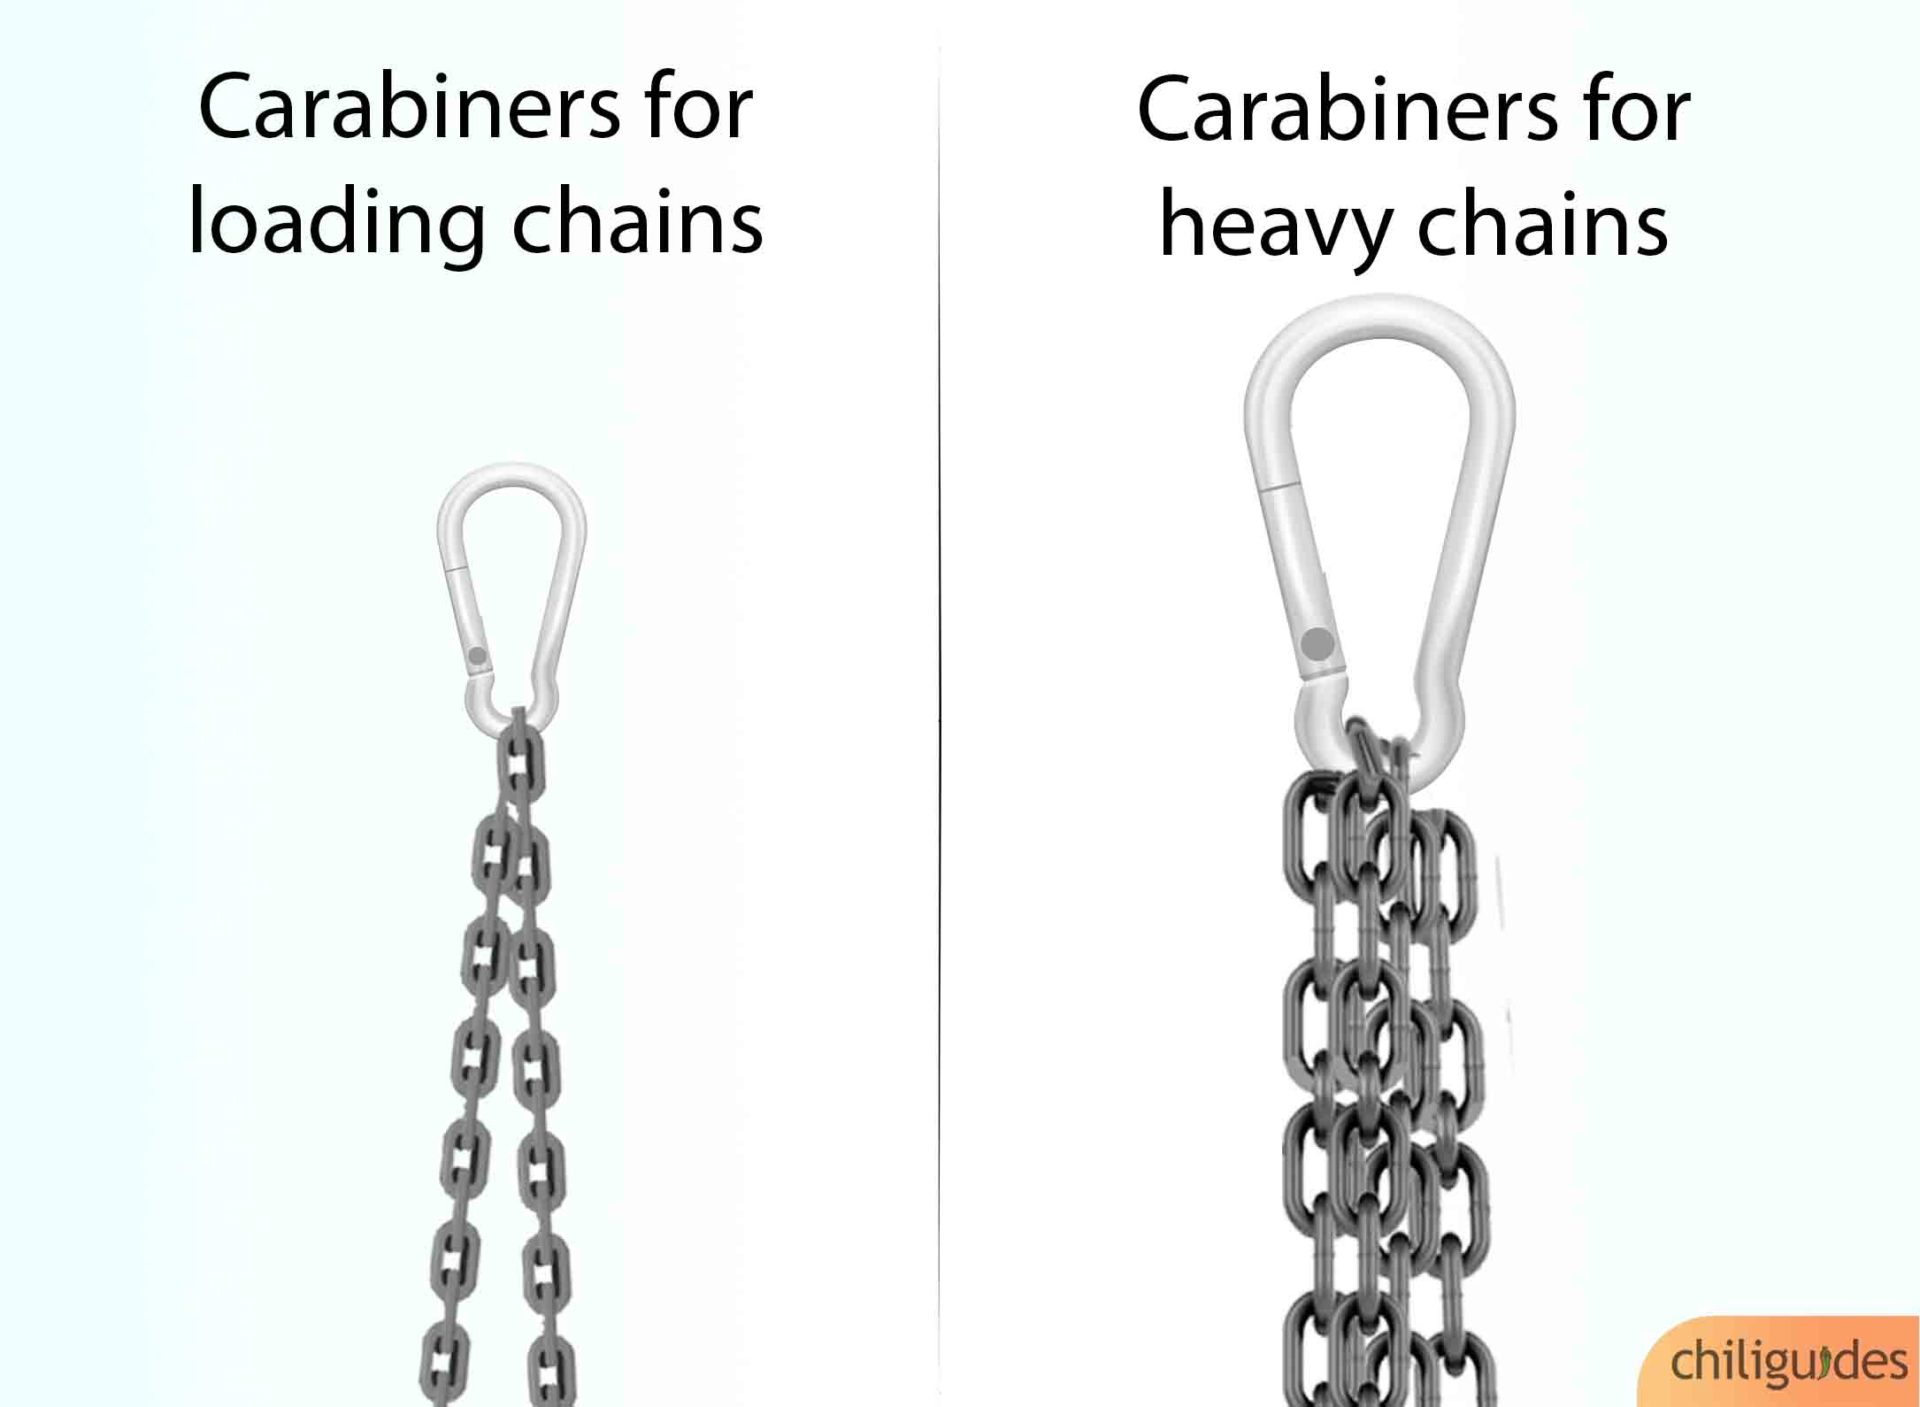 Needs to have the right sized links/carabiners